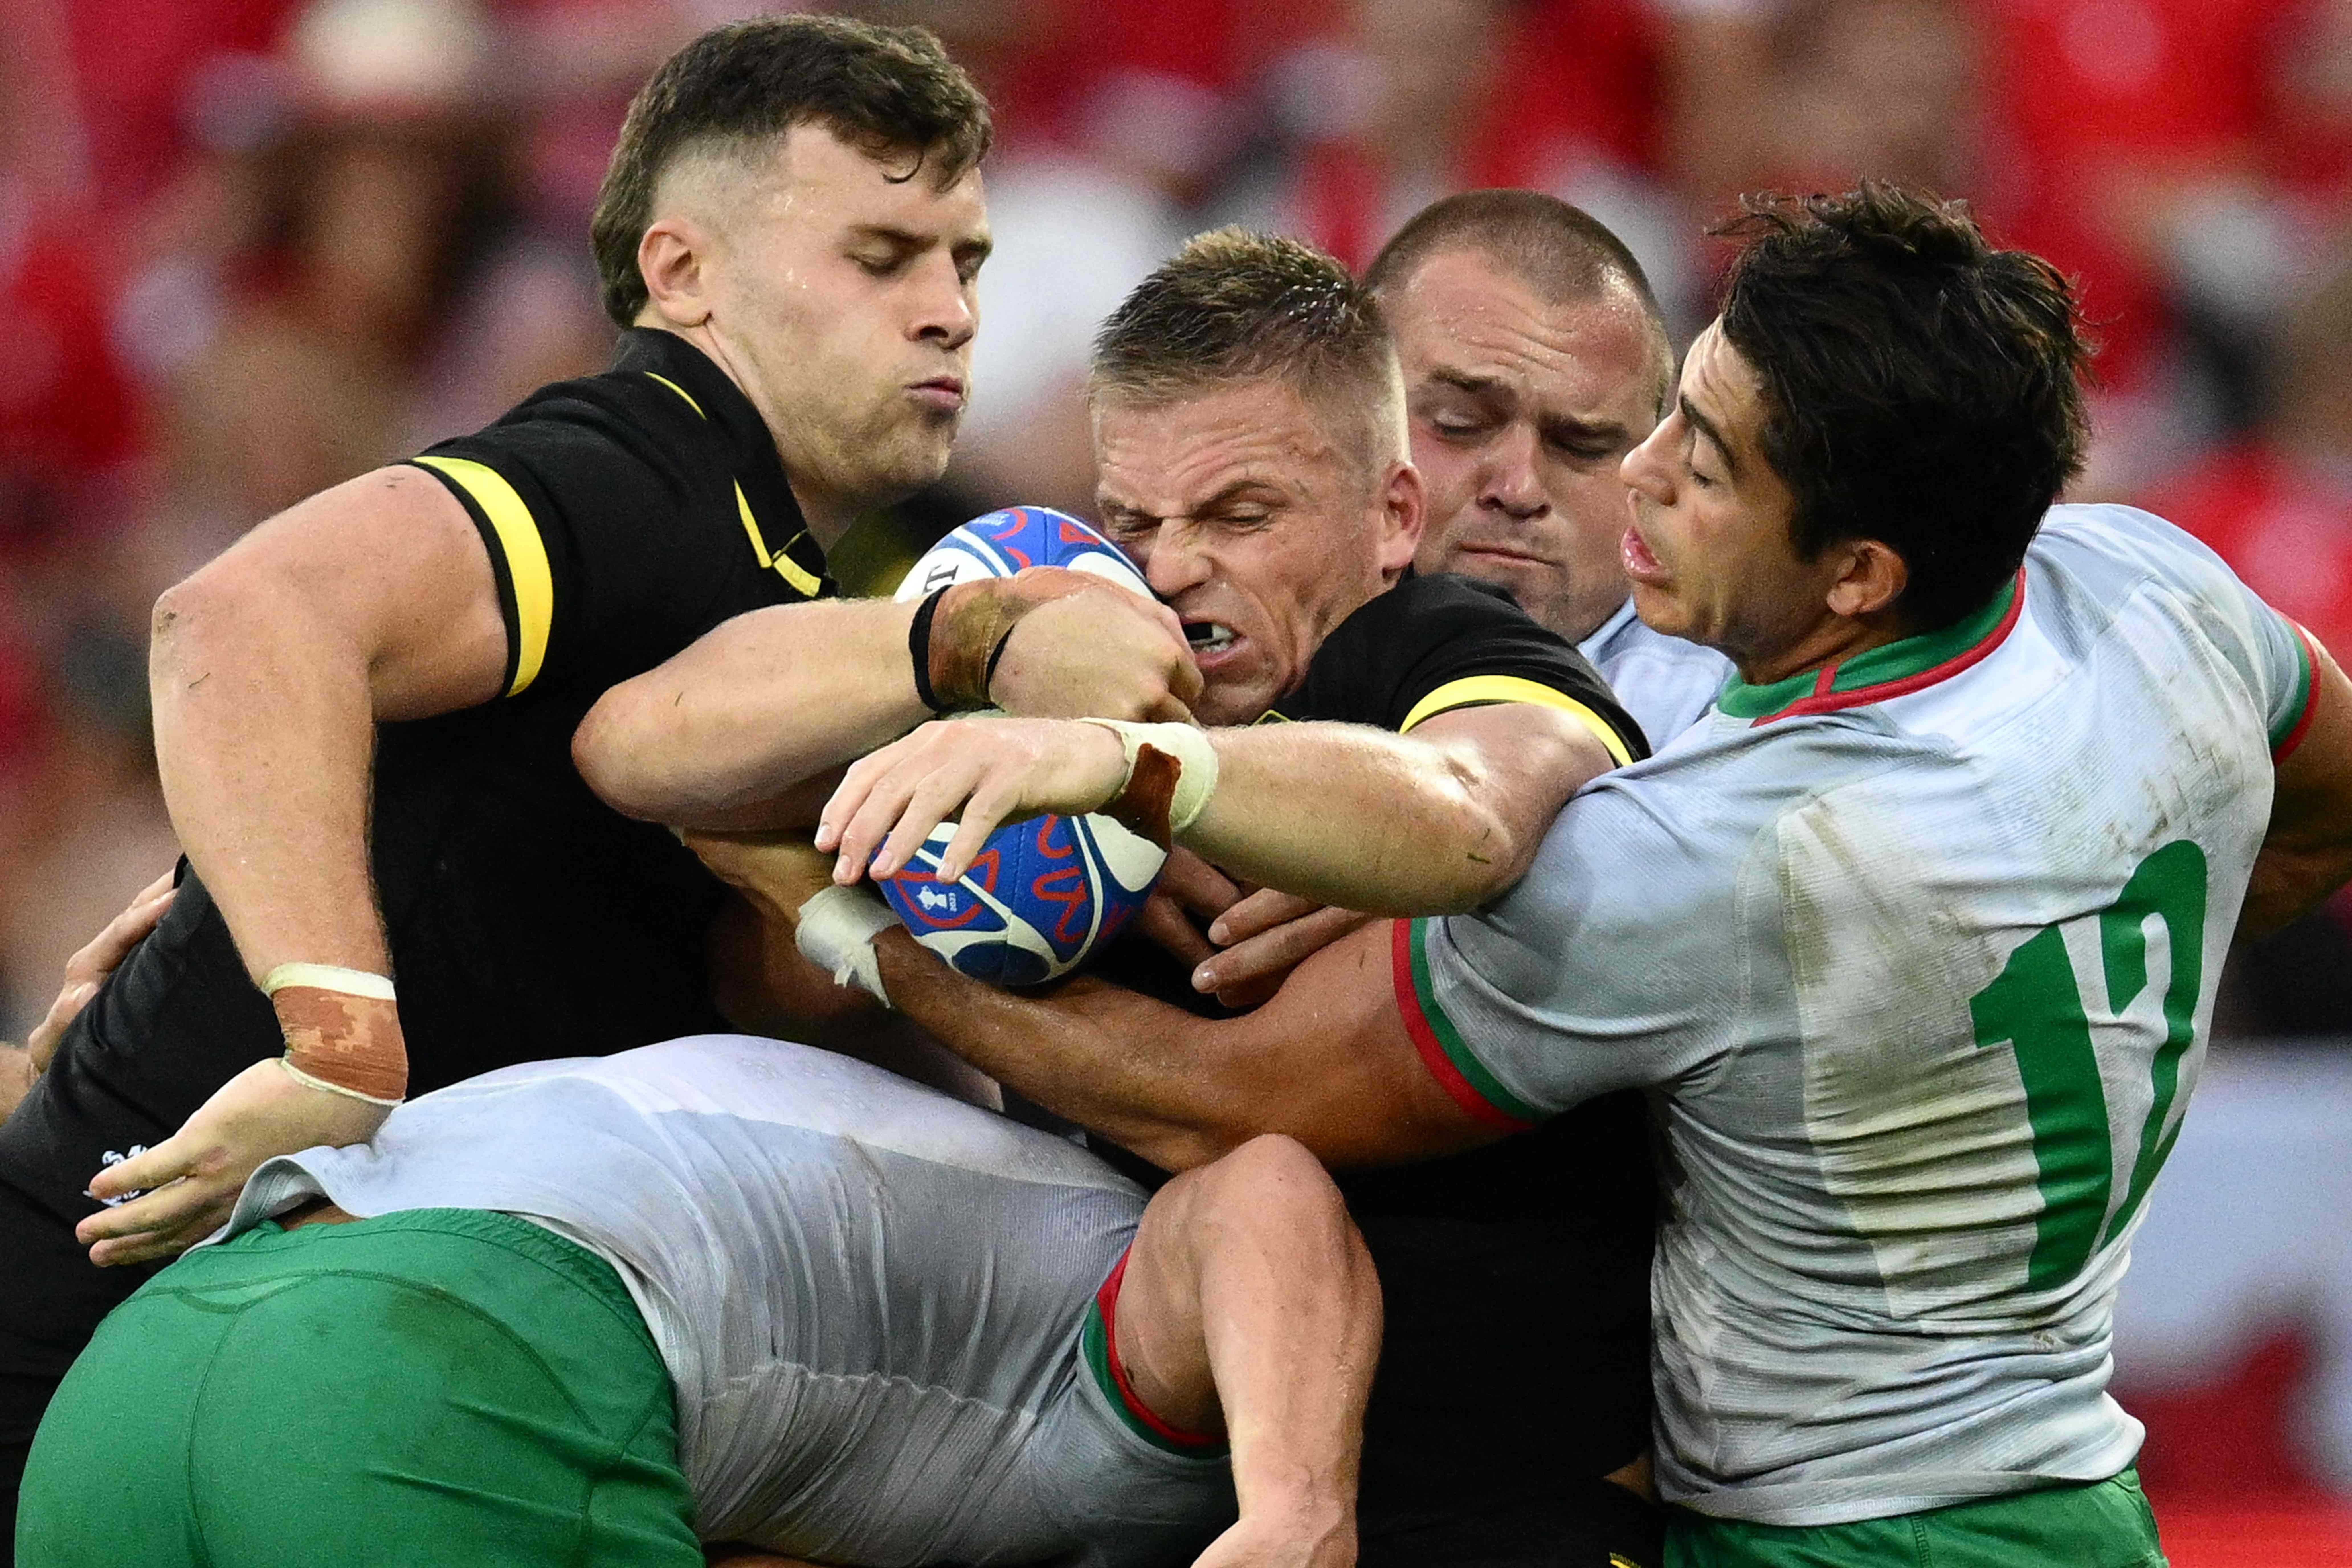 The so-called minnows gave the Welsh a tough first half